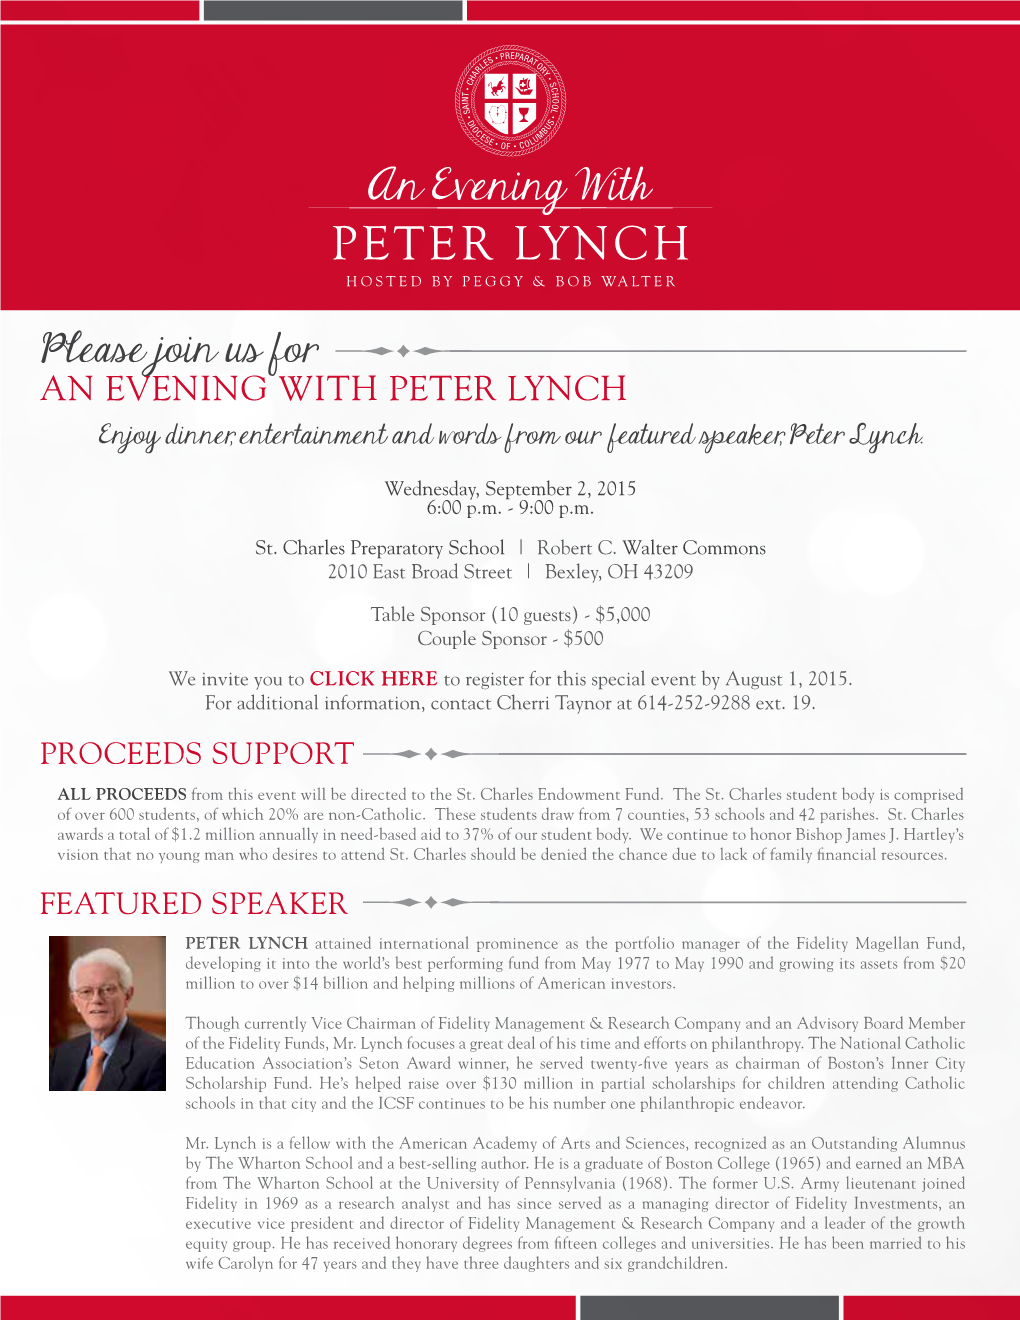 Please Join Us for an EVENING with PETER LYNCH Enjoy Dinner, Entertainment and Words from Our Featured Speaker, Peter Lynch